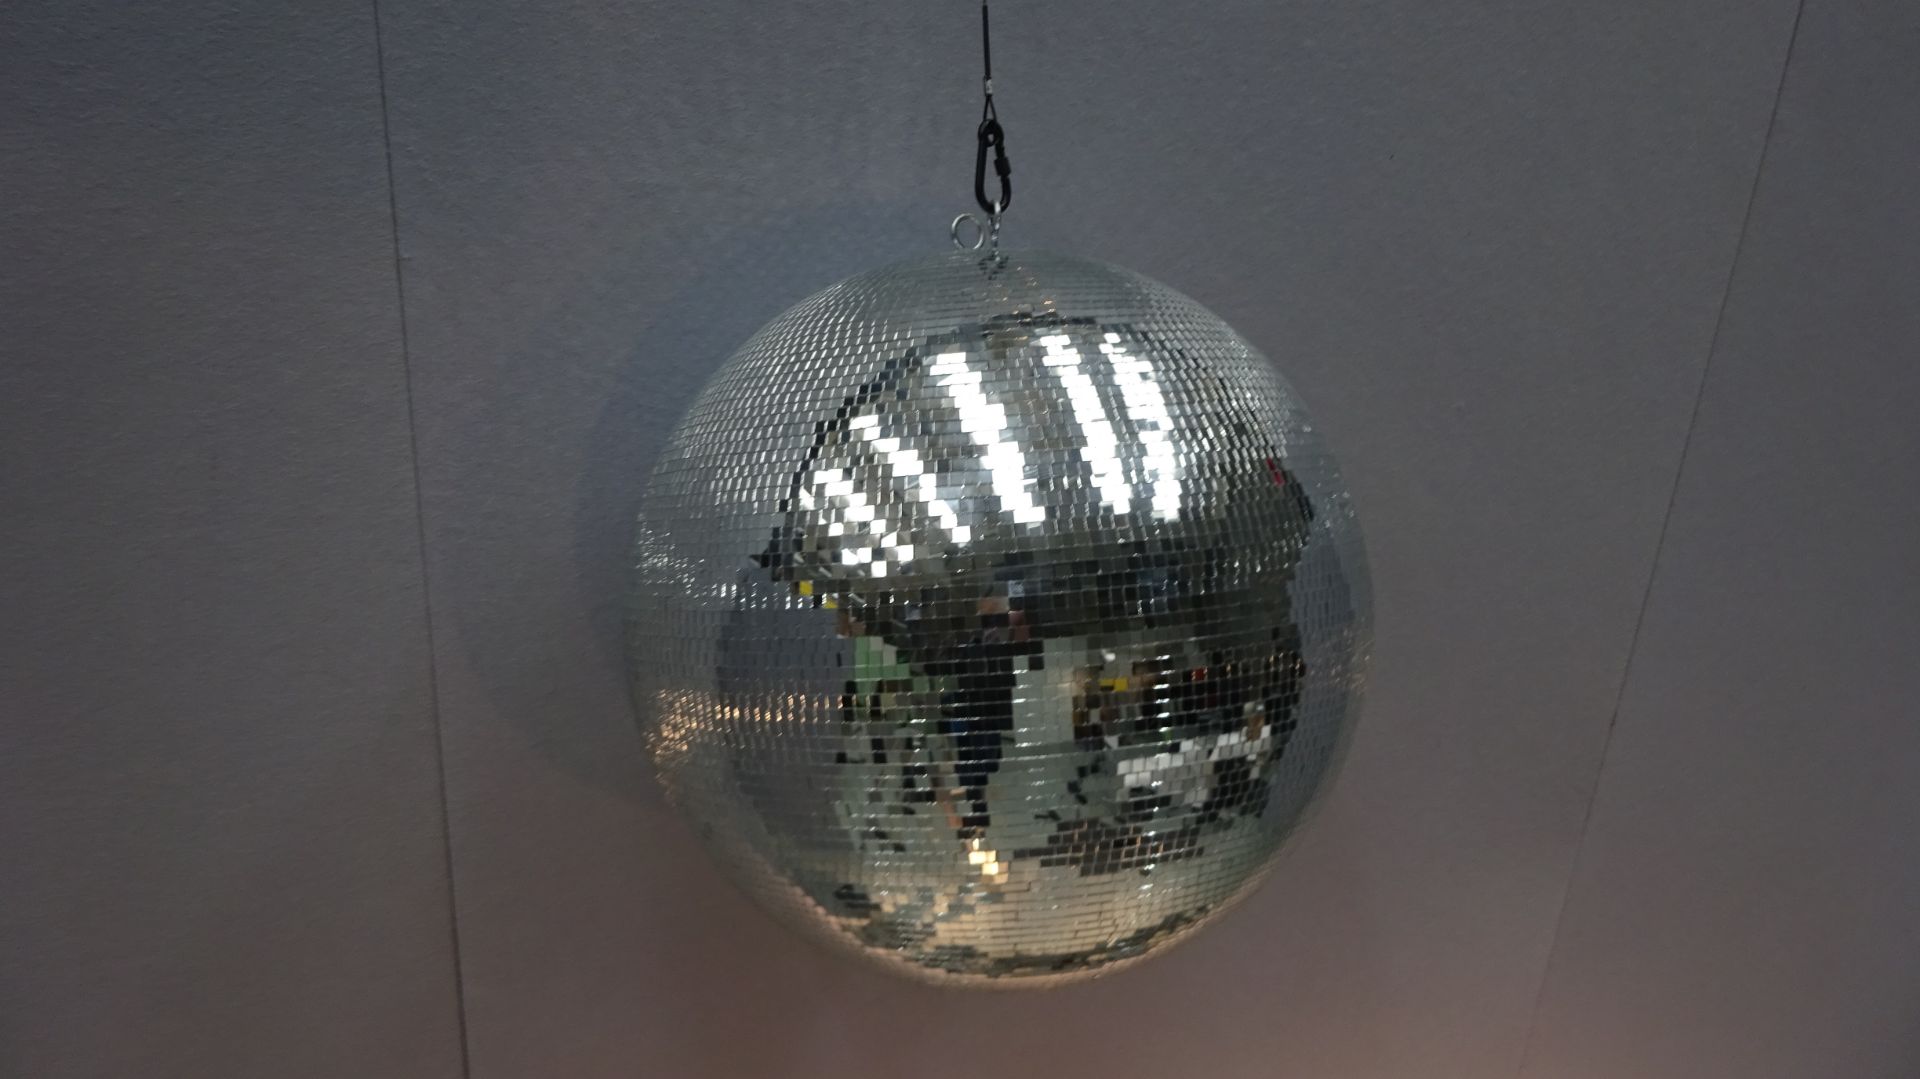 50cm Mirror Ball with Roting Motor c/w Flight Case - Image 2 of 11